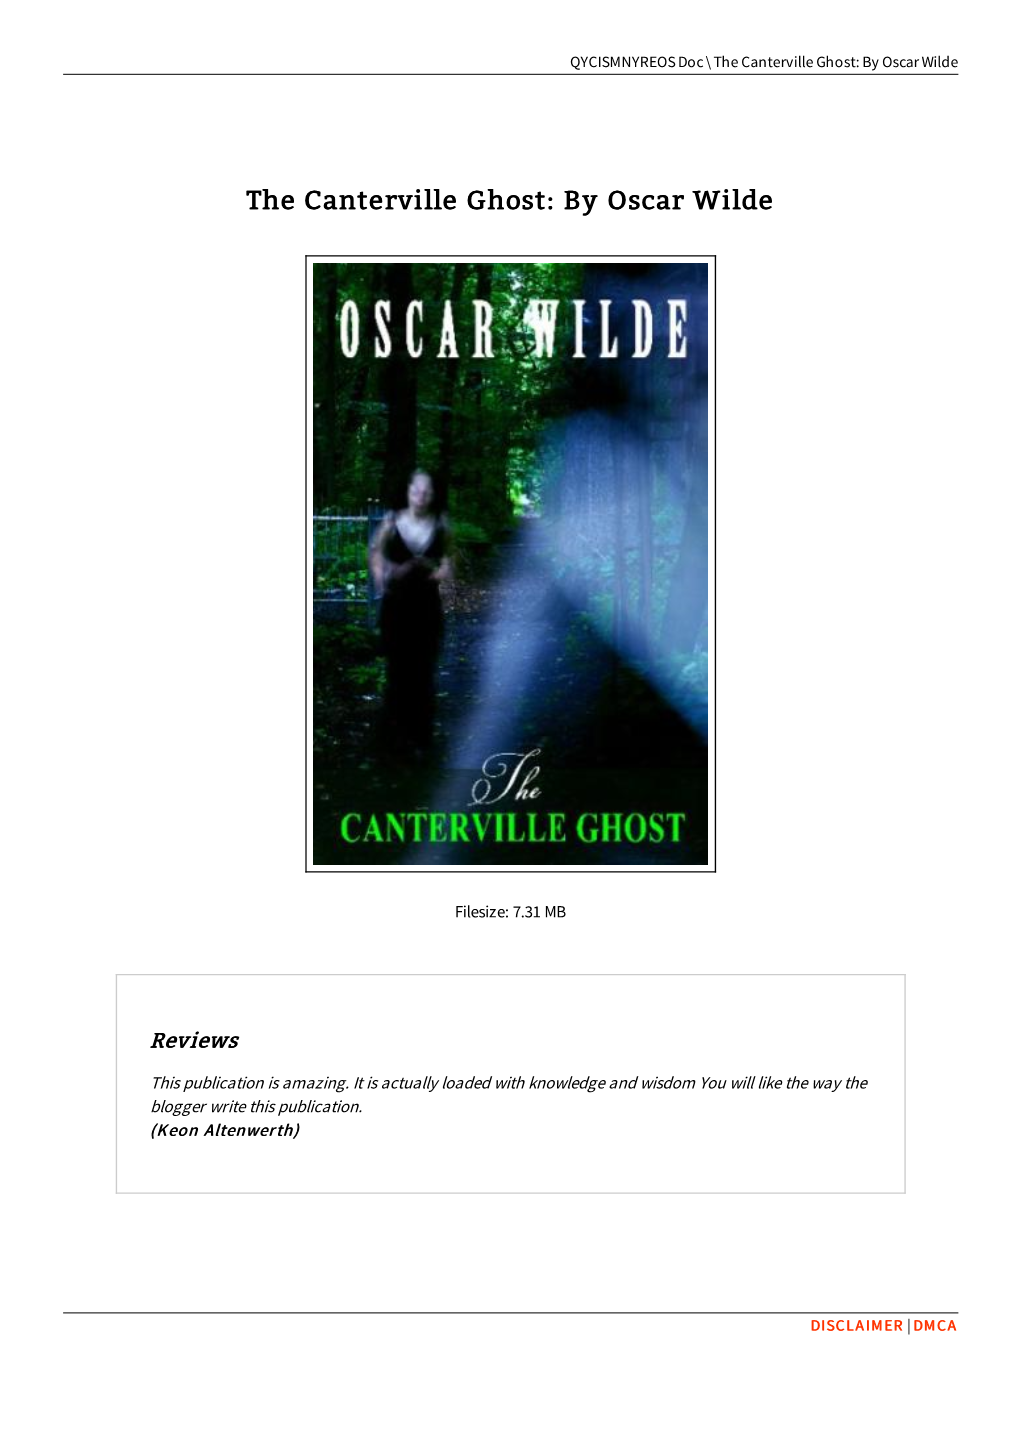 Download PDF the Canterville Ghost: by Oscar Wilde Download Epub the Canterville Ghost: by Oscar Wilde